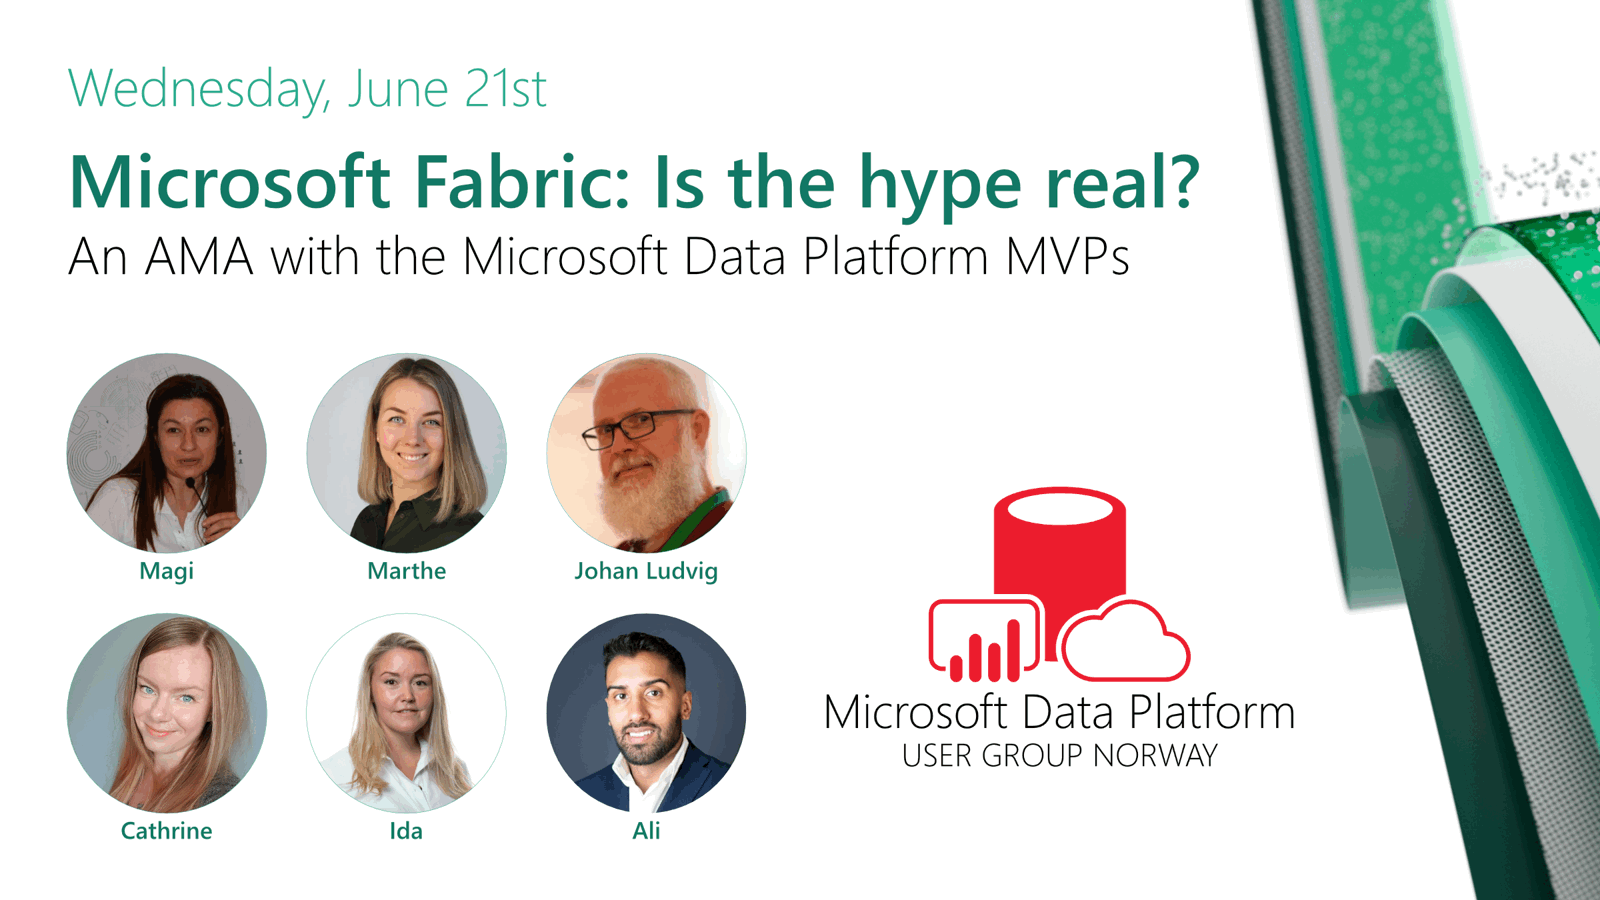 Speaker card showing Cathrine Wilhelmsen and the other MVPs participating in the Microsoft Fabric AMA.